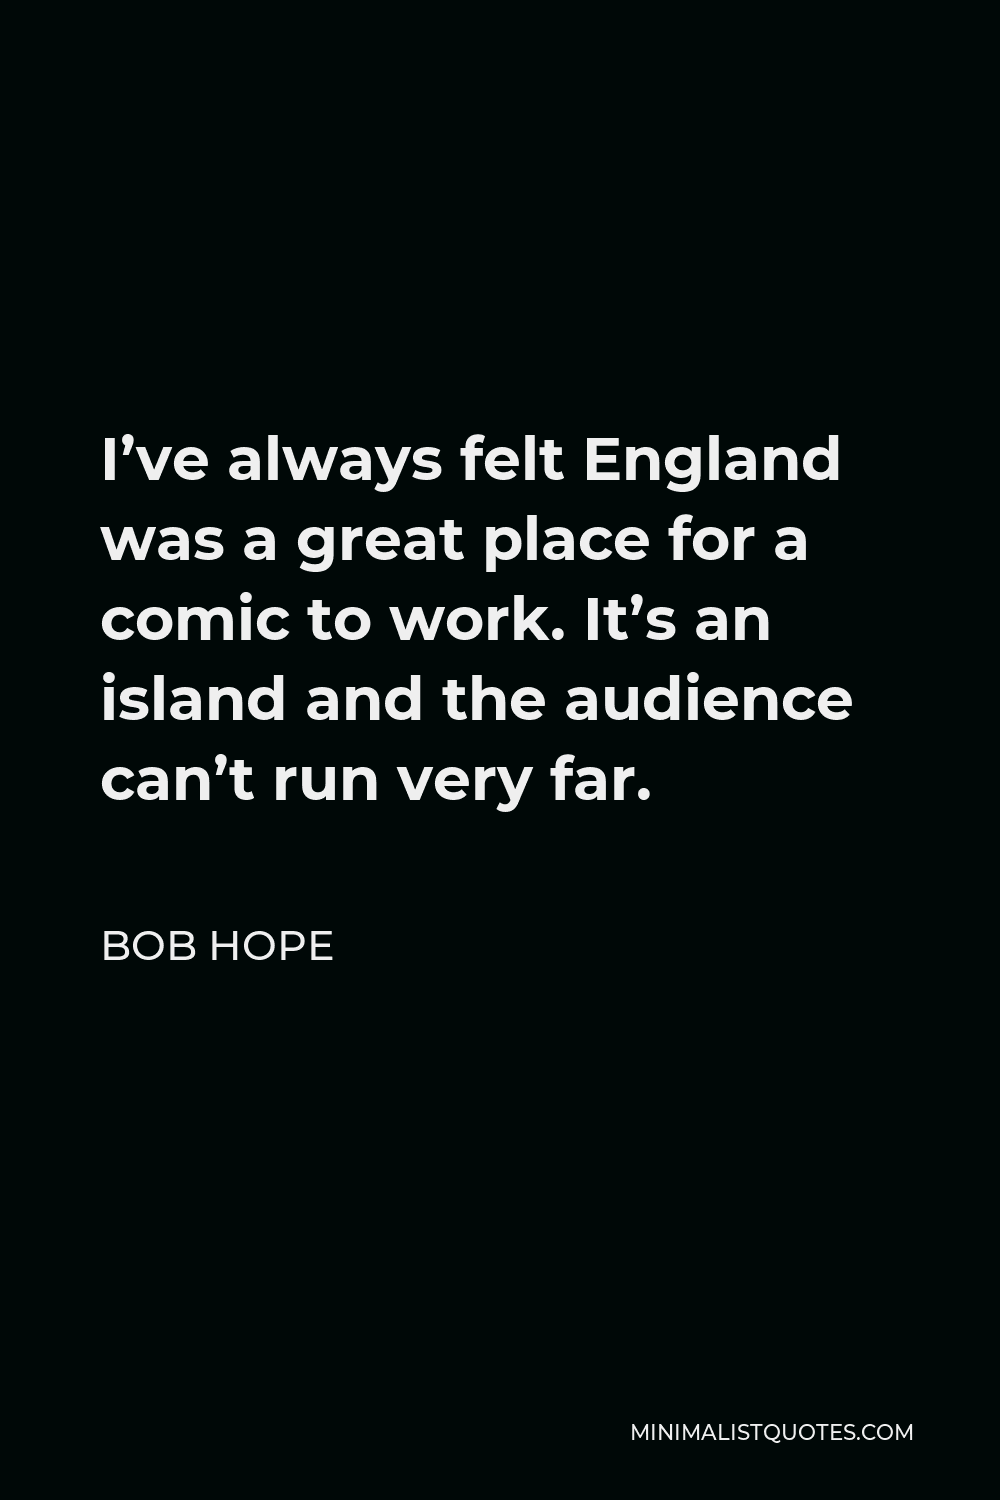 Bob Hope Quote - I’ve always felt England was a great place for a comic to work. It’s an island and the audience can’t run very far.